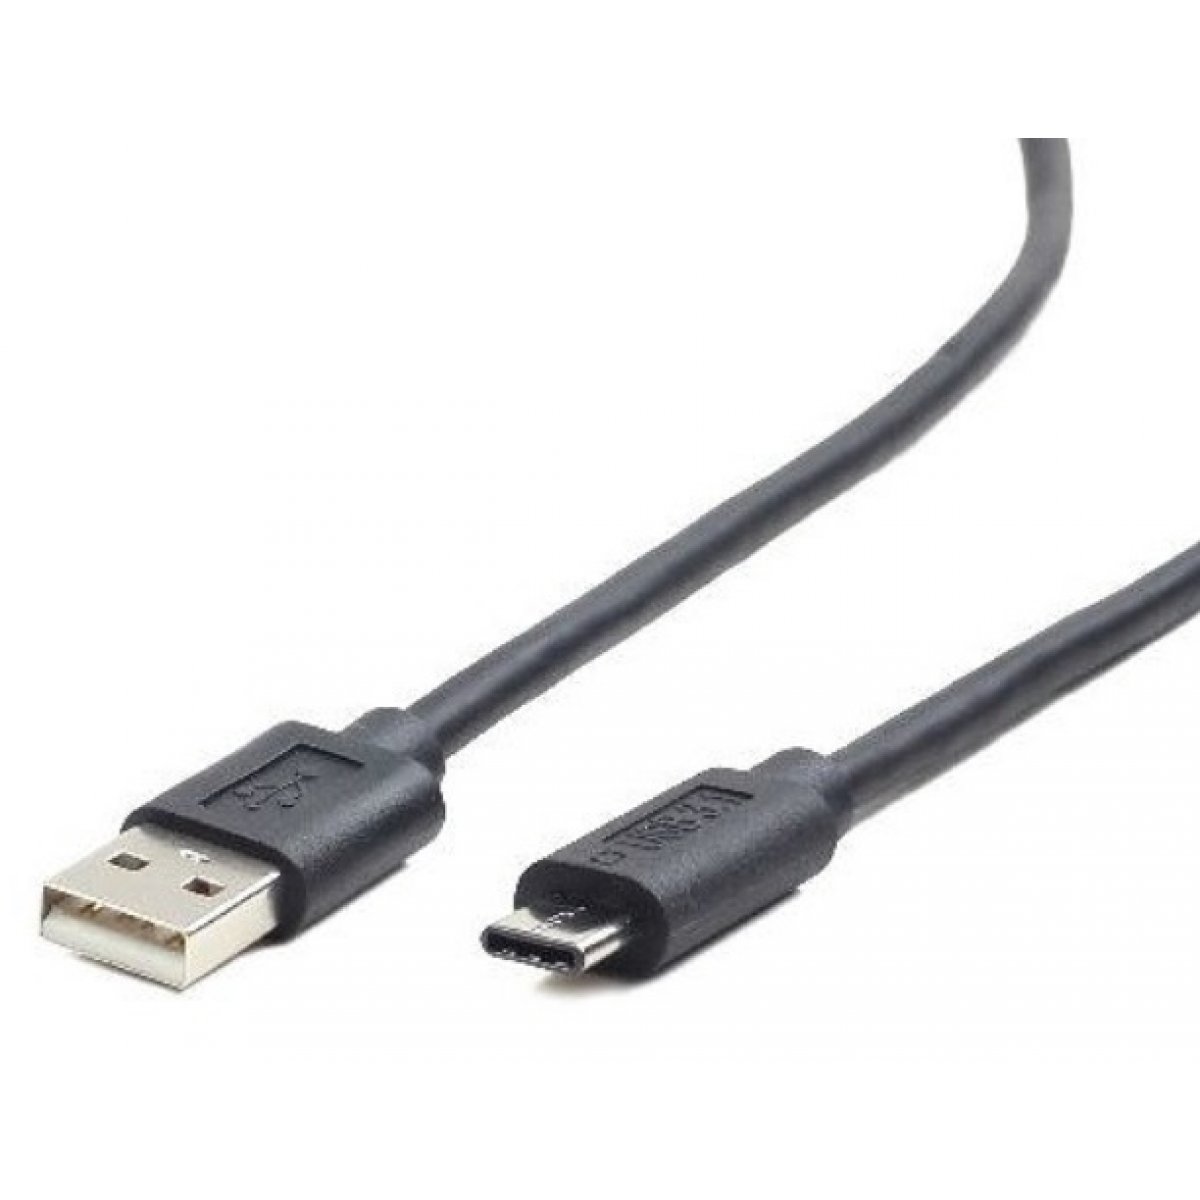 CABLE USB A/M - USB C/M 2.0 (3M) GEMBIRD